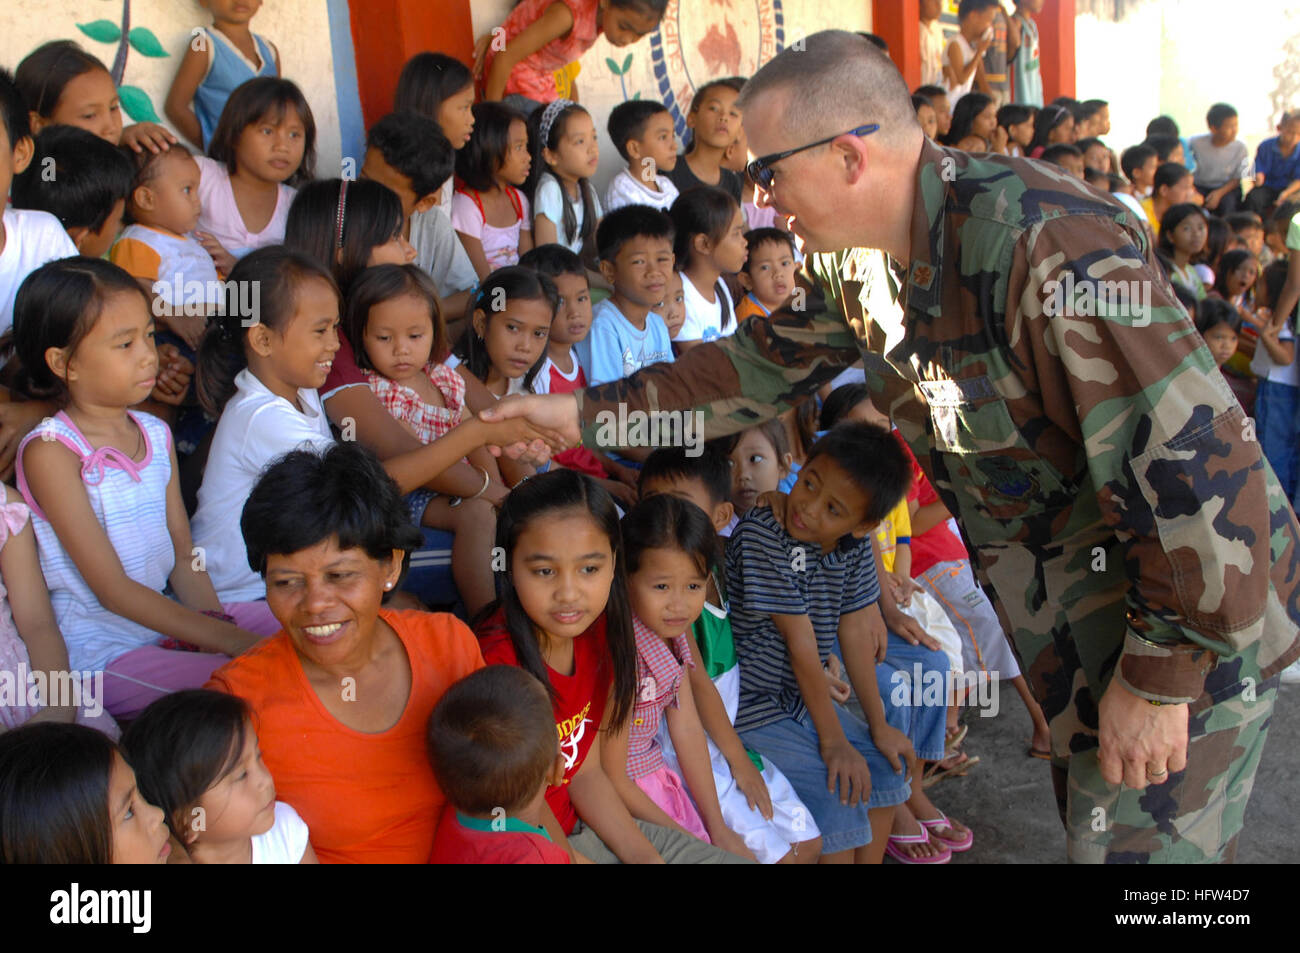 071215-N-7286M-010 ZAMBOANGA CITY, Philippines (Dec. 15, 2007) U.S. Air Force Chaplin, Maj. Philip G. Houser meets with the children at MEIN College. Sailors, Airmen and Soldiers assigned to Joint Special Operations Task Force-Philippines (JSOTF-P) assisted MEIN College, INC. and the Kiwanis Club of METRO Zamboanga in handing out presents for the holidays at the as part of their annual community outreach program. U.S. Navy photo by Mass Communication Specialist 1st Class Daniel R. Mennuto (Released) US Navy 071215-N-7286M-010 U.S. Air Force Chaplain, Maj. Philip G. Houser meets with the childr Stock Photo